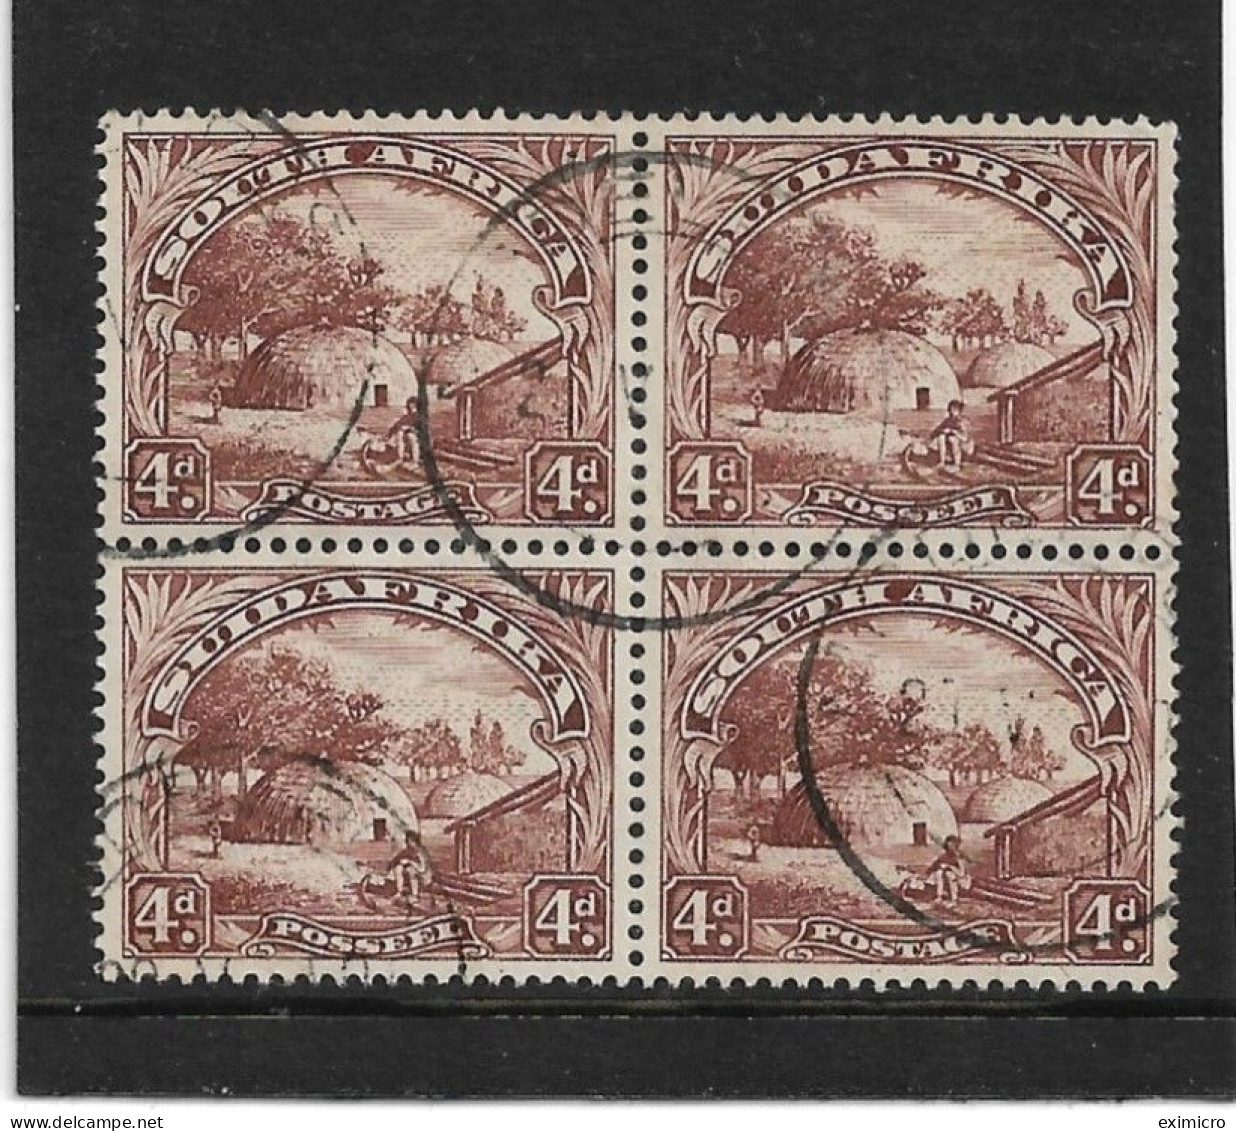 SOUTH AFRICA 1927 - 1930 4d IN BLOCK OF FOUR SG 35b PERF 14 FINE USED Cat £110 - Used Stamps